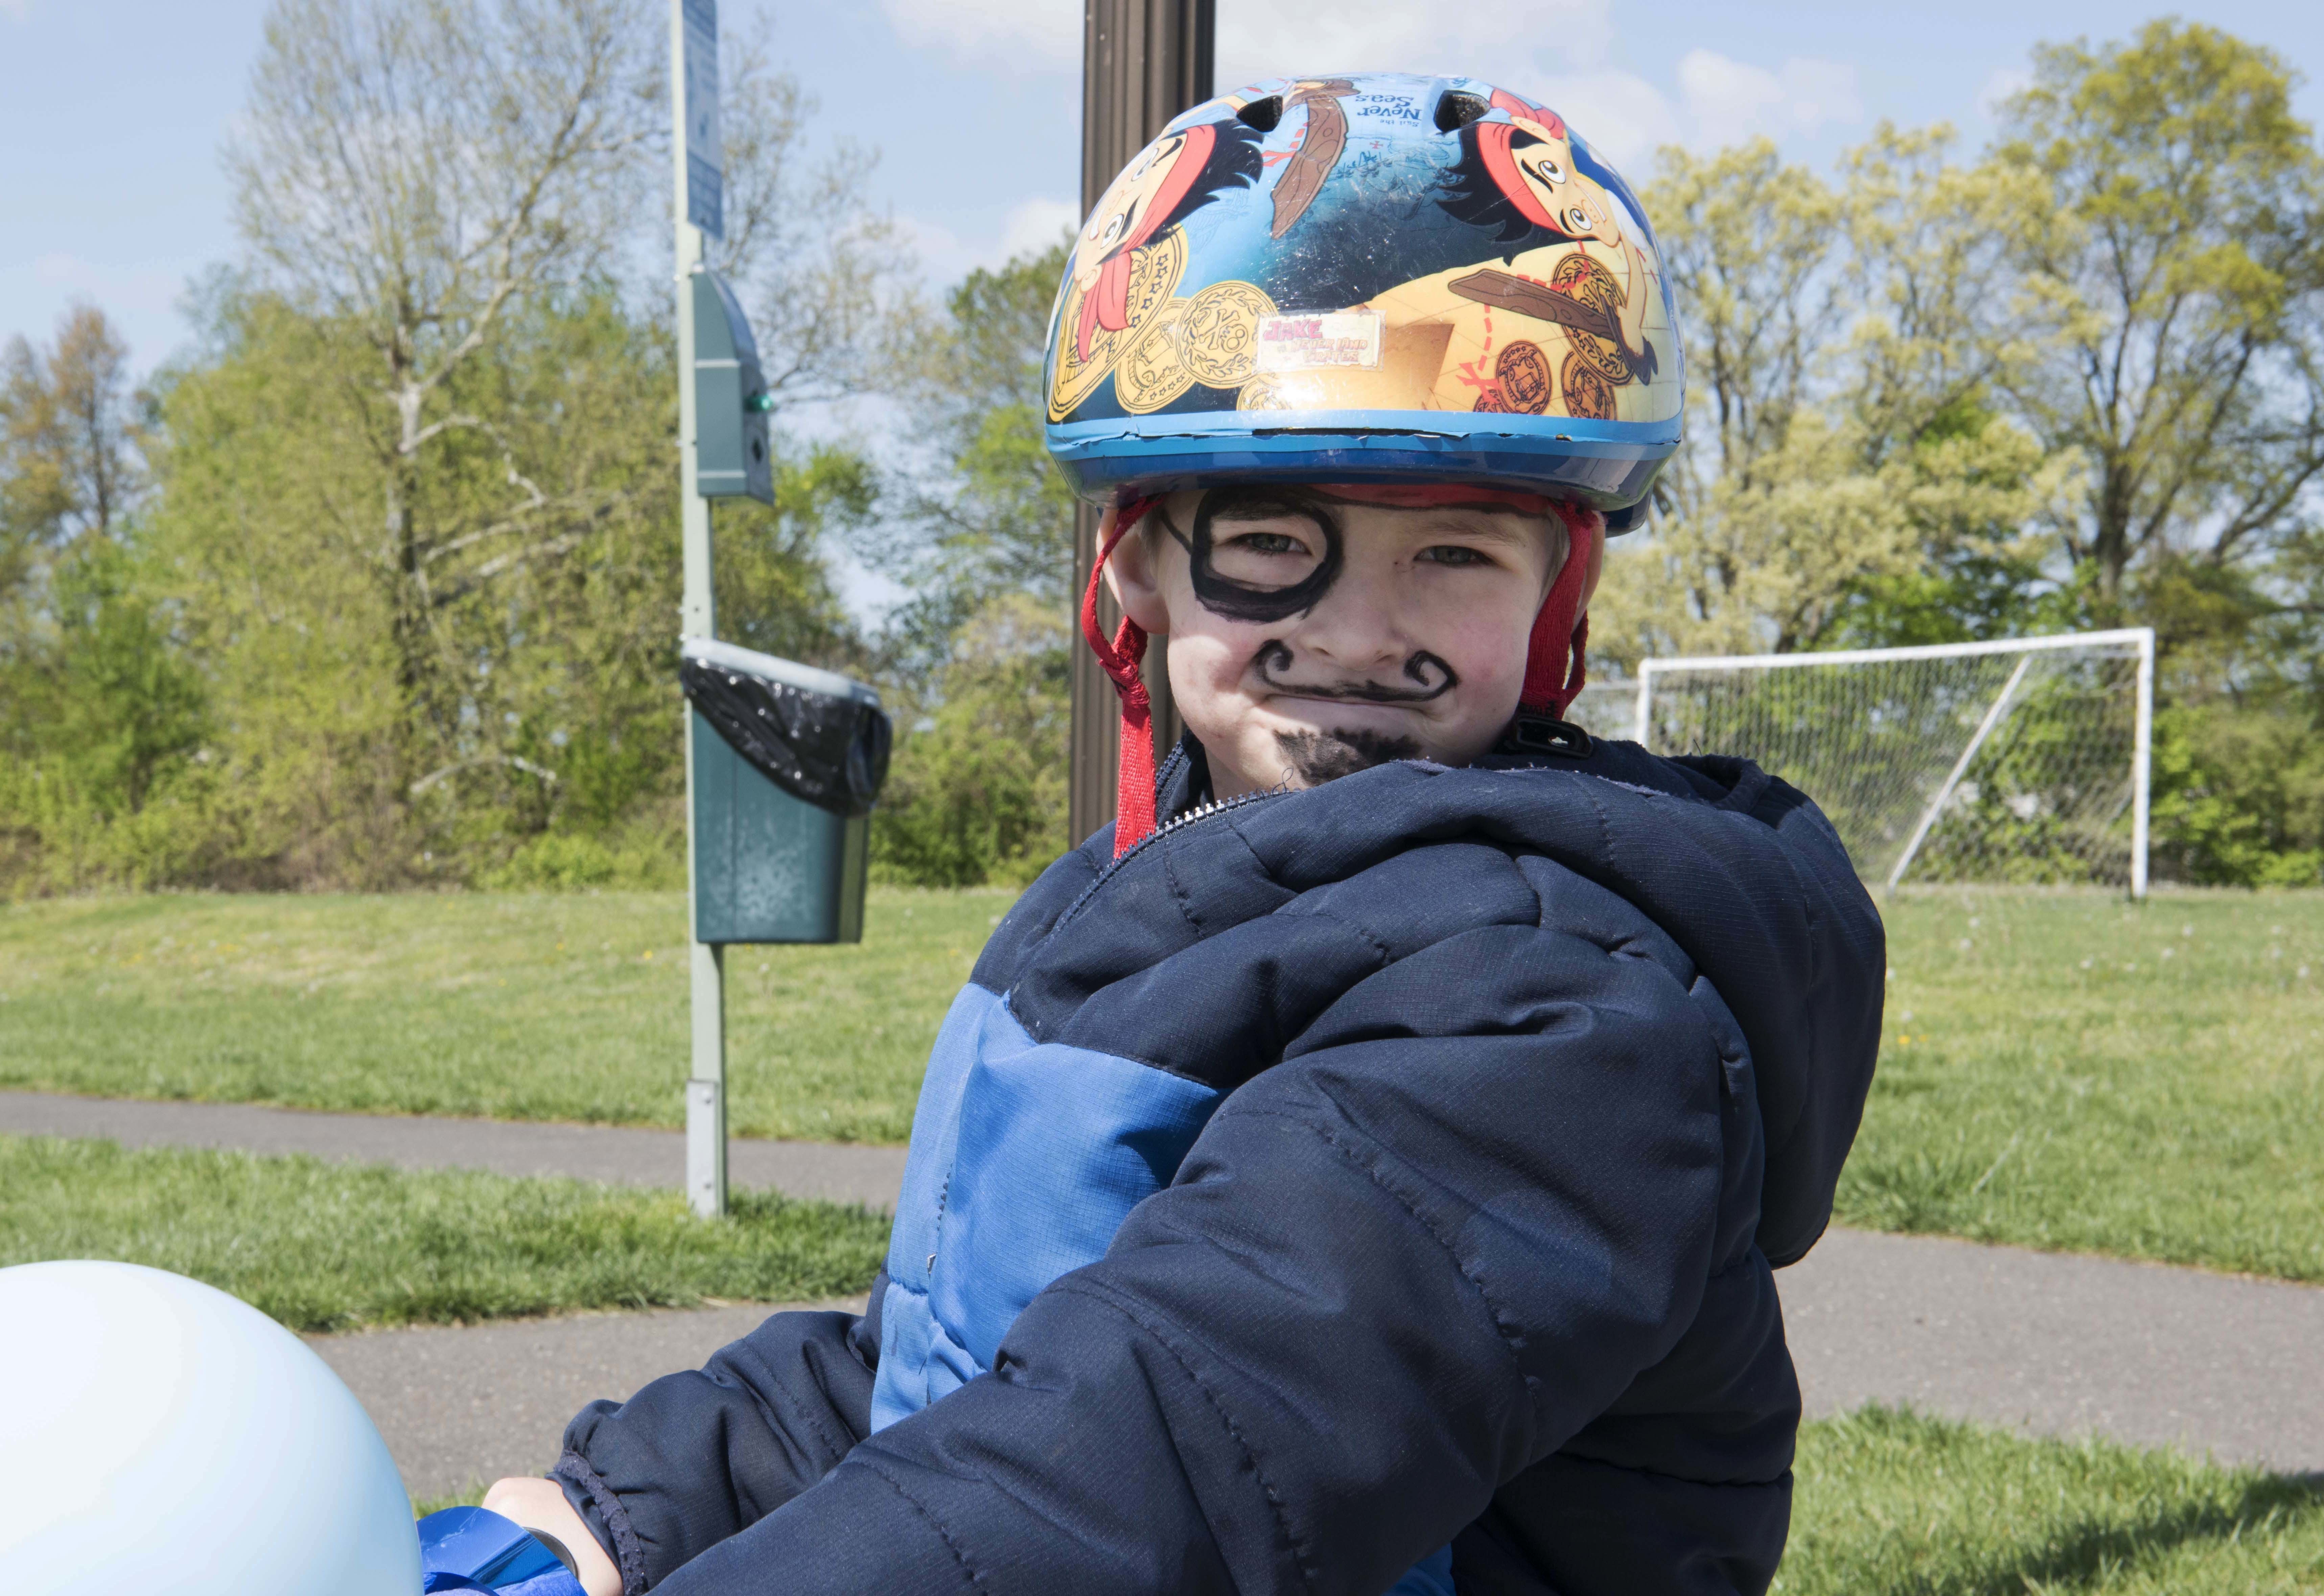 A military child imitates a pirate on his decorated bike at Family Advocacy’s Kid’s on Wheels Parade on Joint Base McGuire-Dix-Lakehurst, New Jersey, April 27, 2019. Child Abuse Prevention Month seeks to create a community of families that will educate and support each other against child abuse and neglect. For more information or help, call Family Advocacy at (609) 754-9680 or the 24/7 Hotline at (609) 283-5015. (U.S. Air Force photo by Airman 1st Class Briana Cespedes)